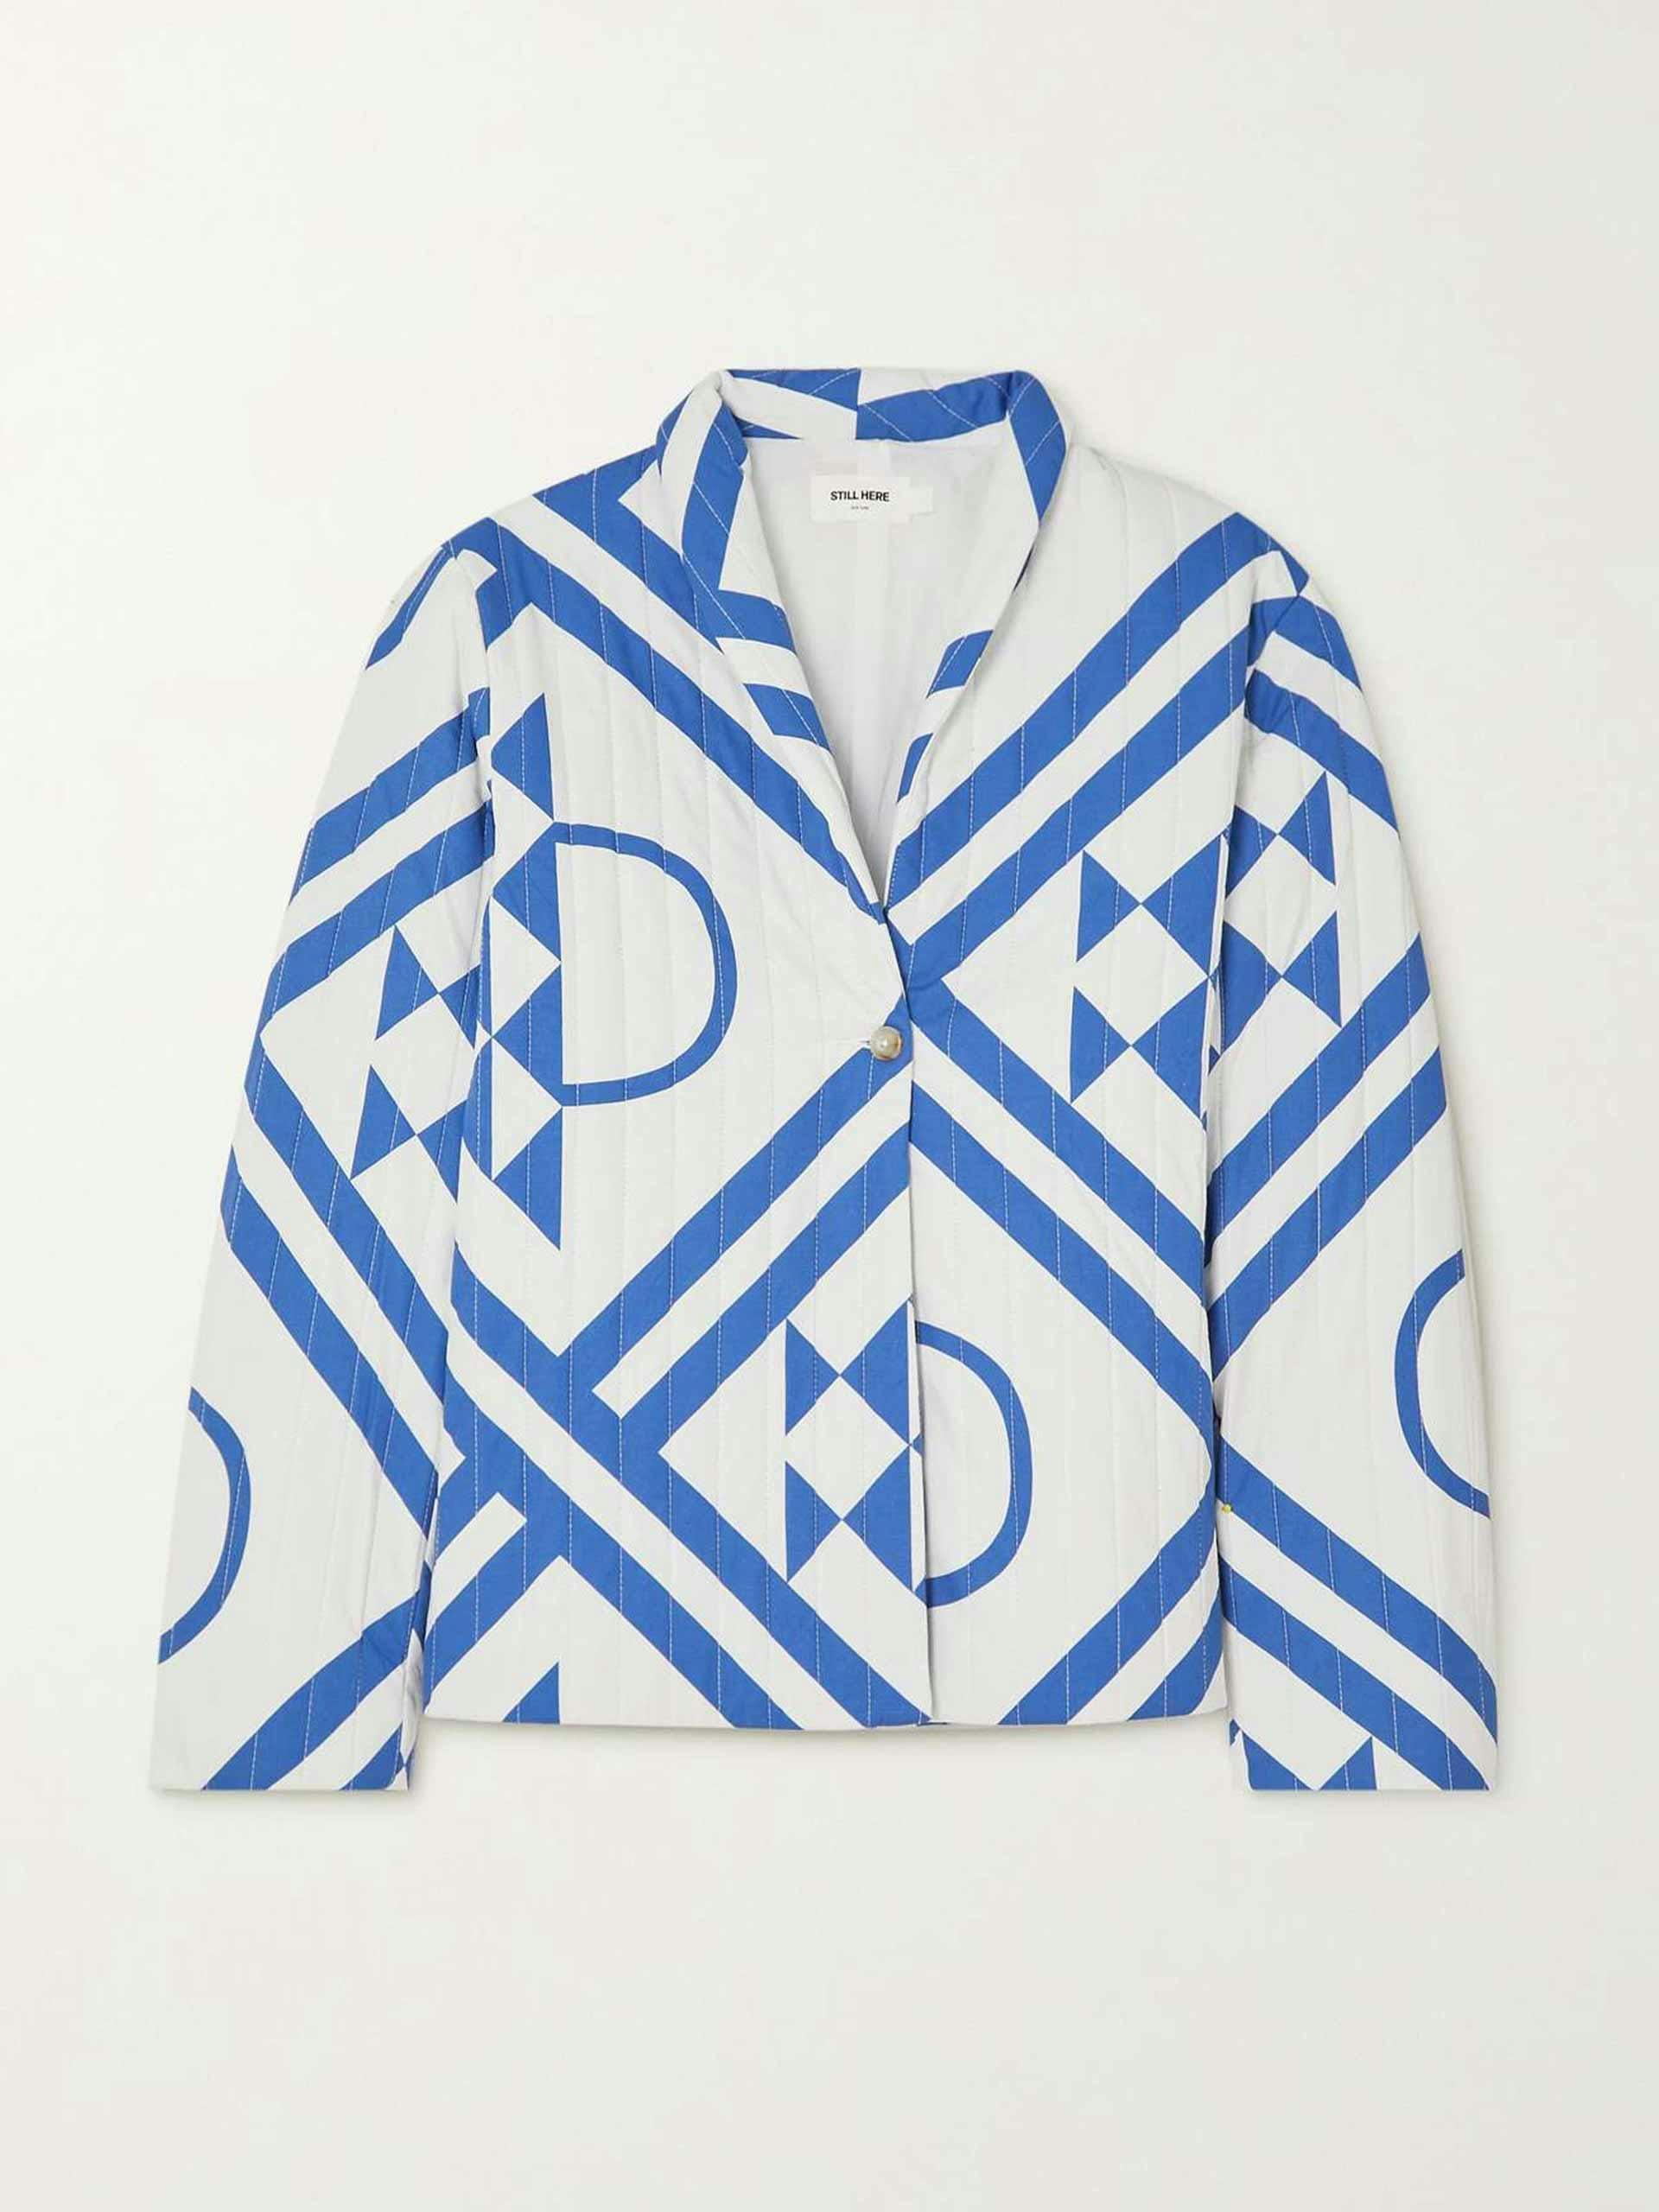 Blue and white quilted jacket